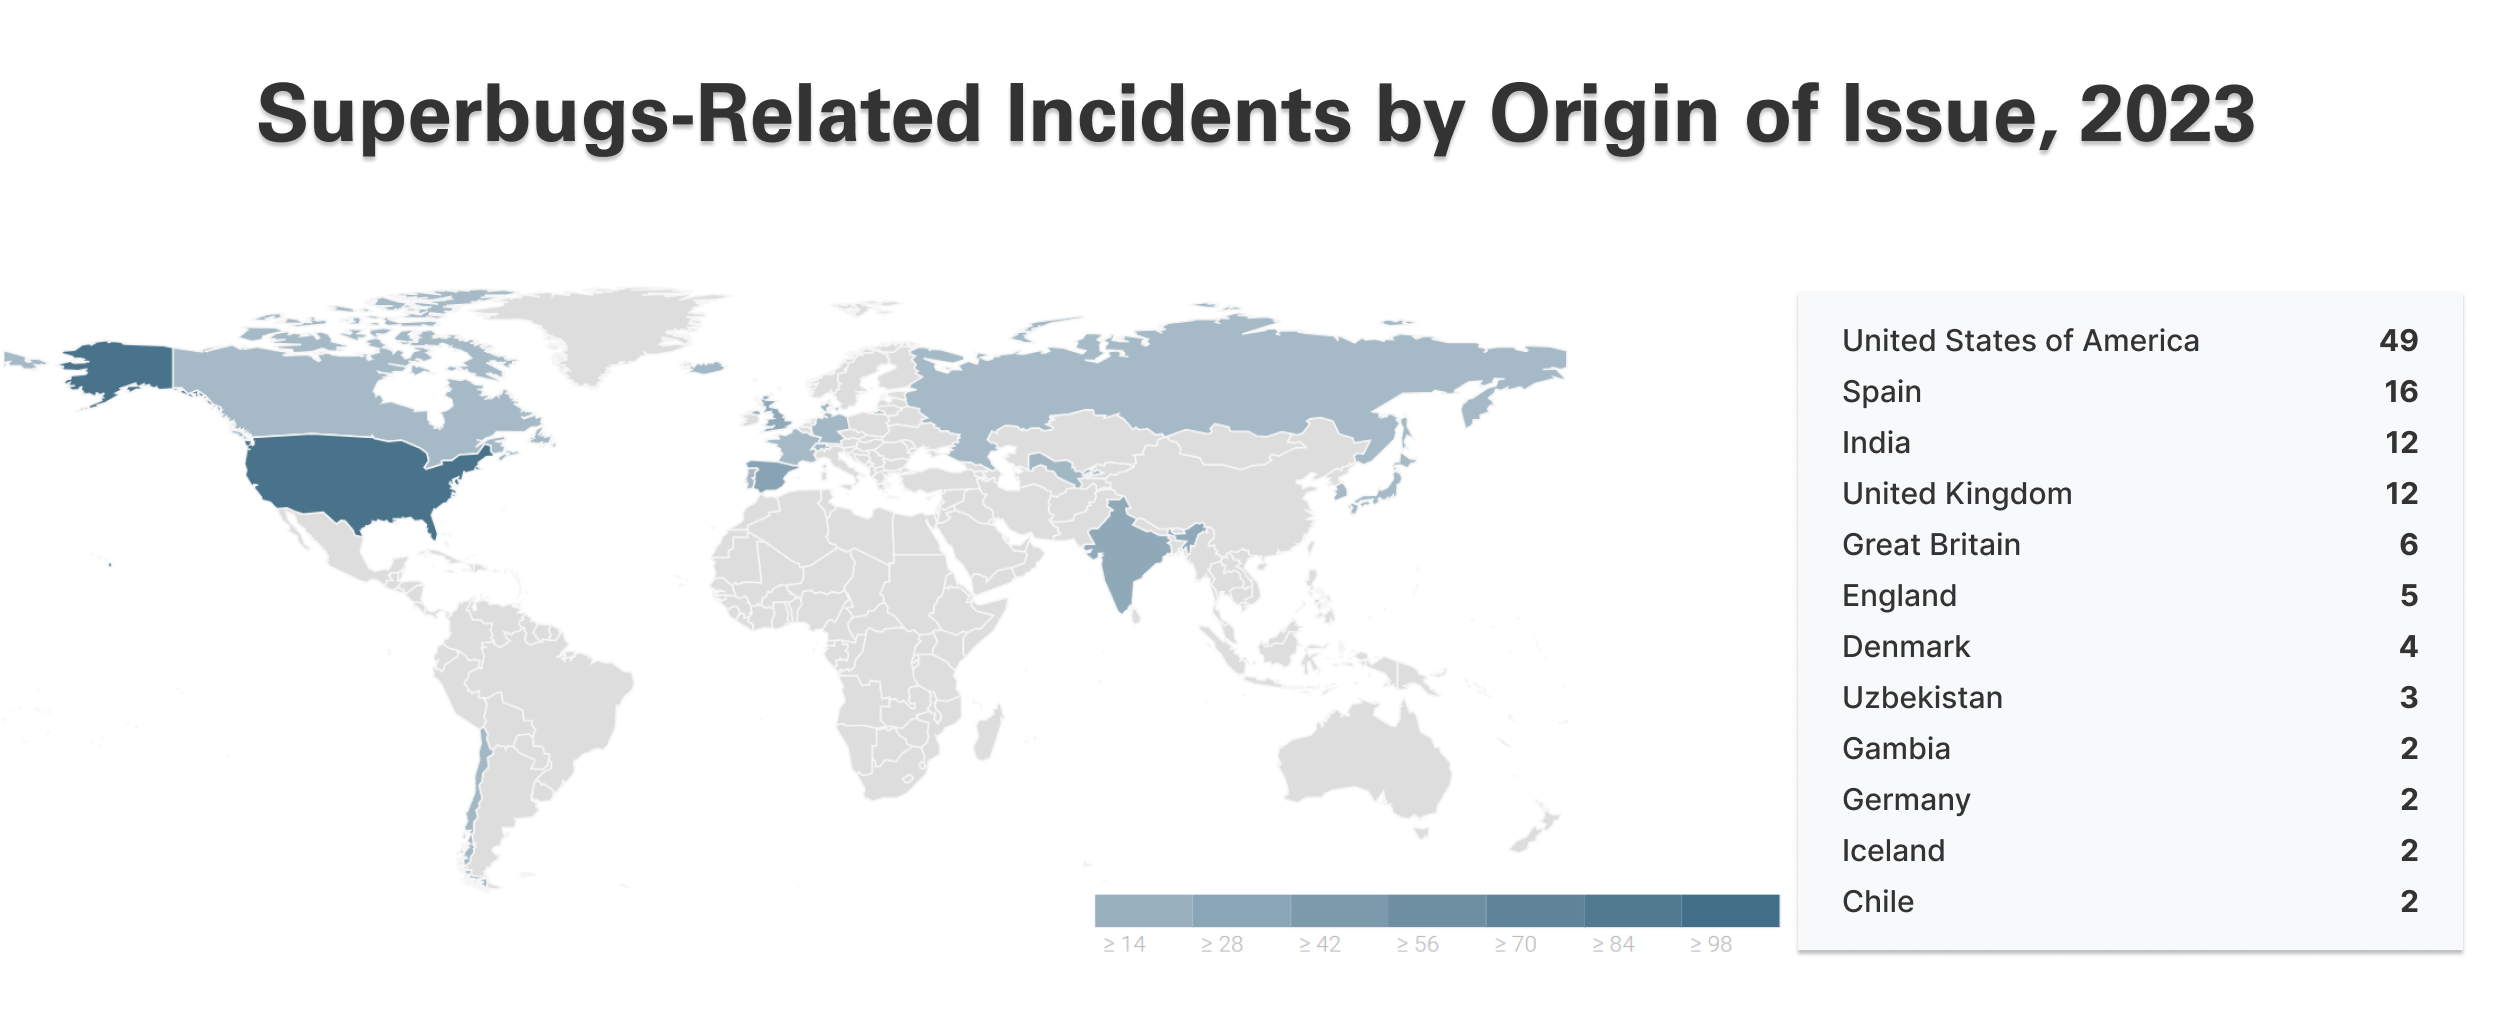 Superbugs-Related Incidents by Origin of Issue, 2023